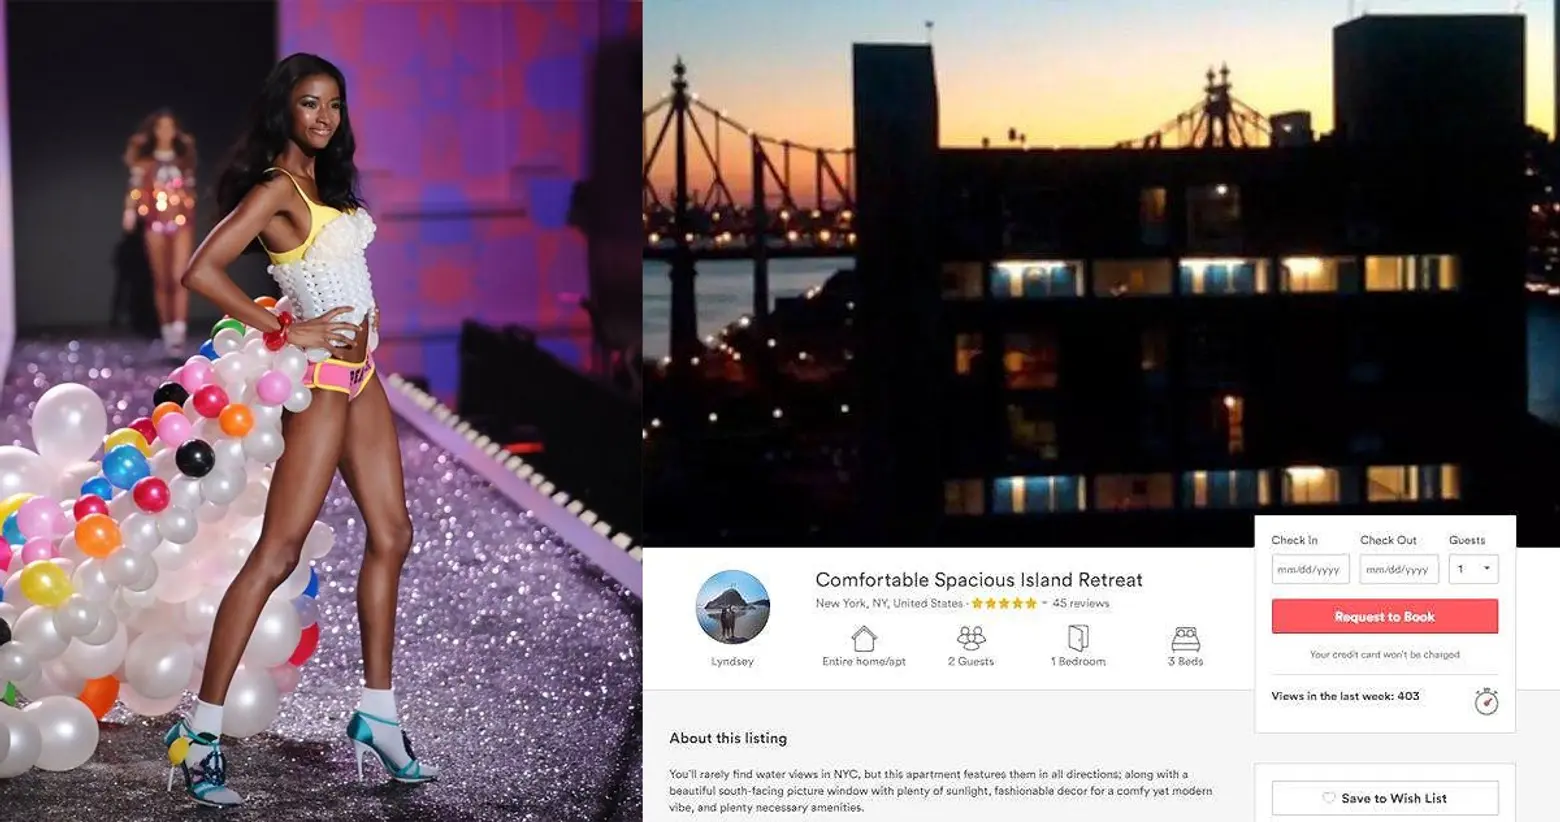 Victoria’s Secret model sued for misrepresenting her ‘comfortable spacious island retreat’ on Airbnb